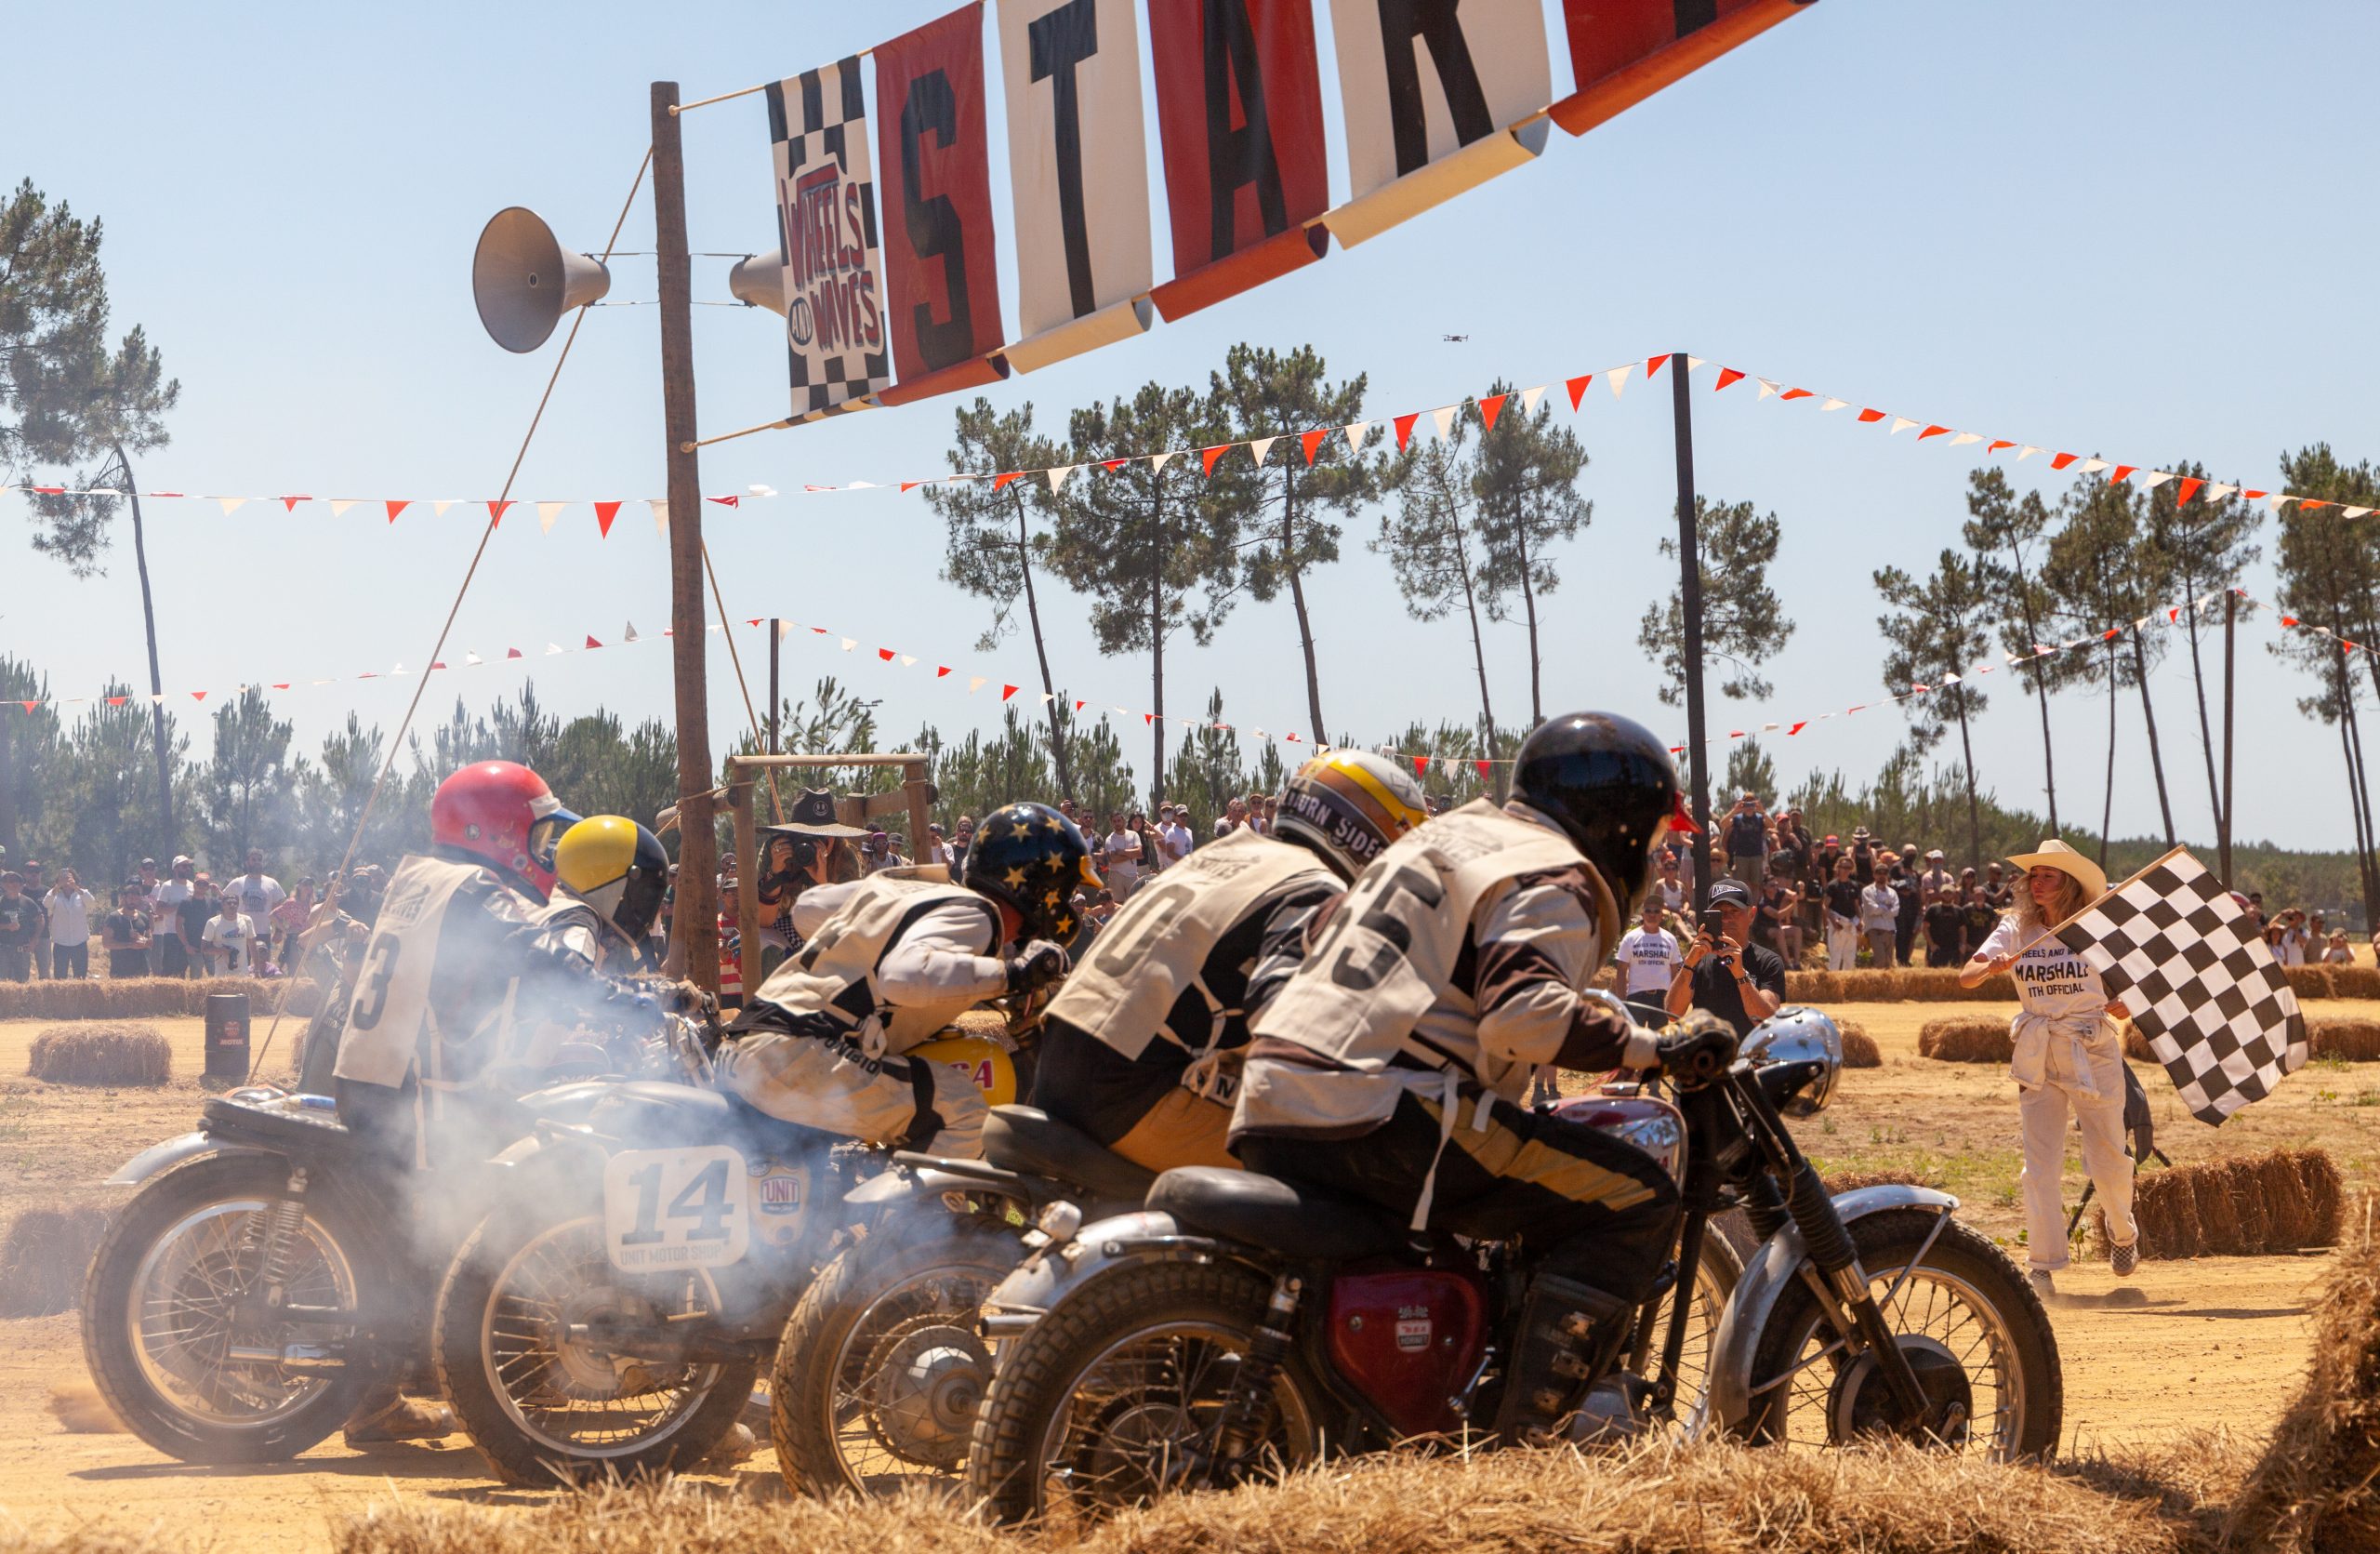 I've found biker heaven: Riding the dunes at Wheels and Waves